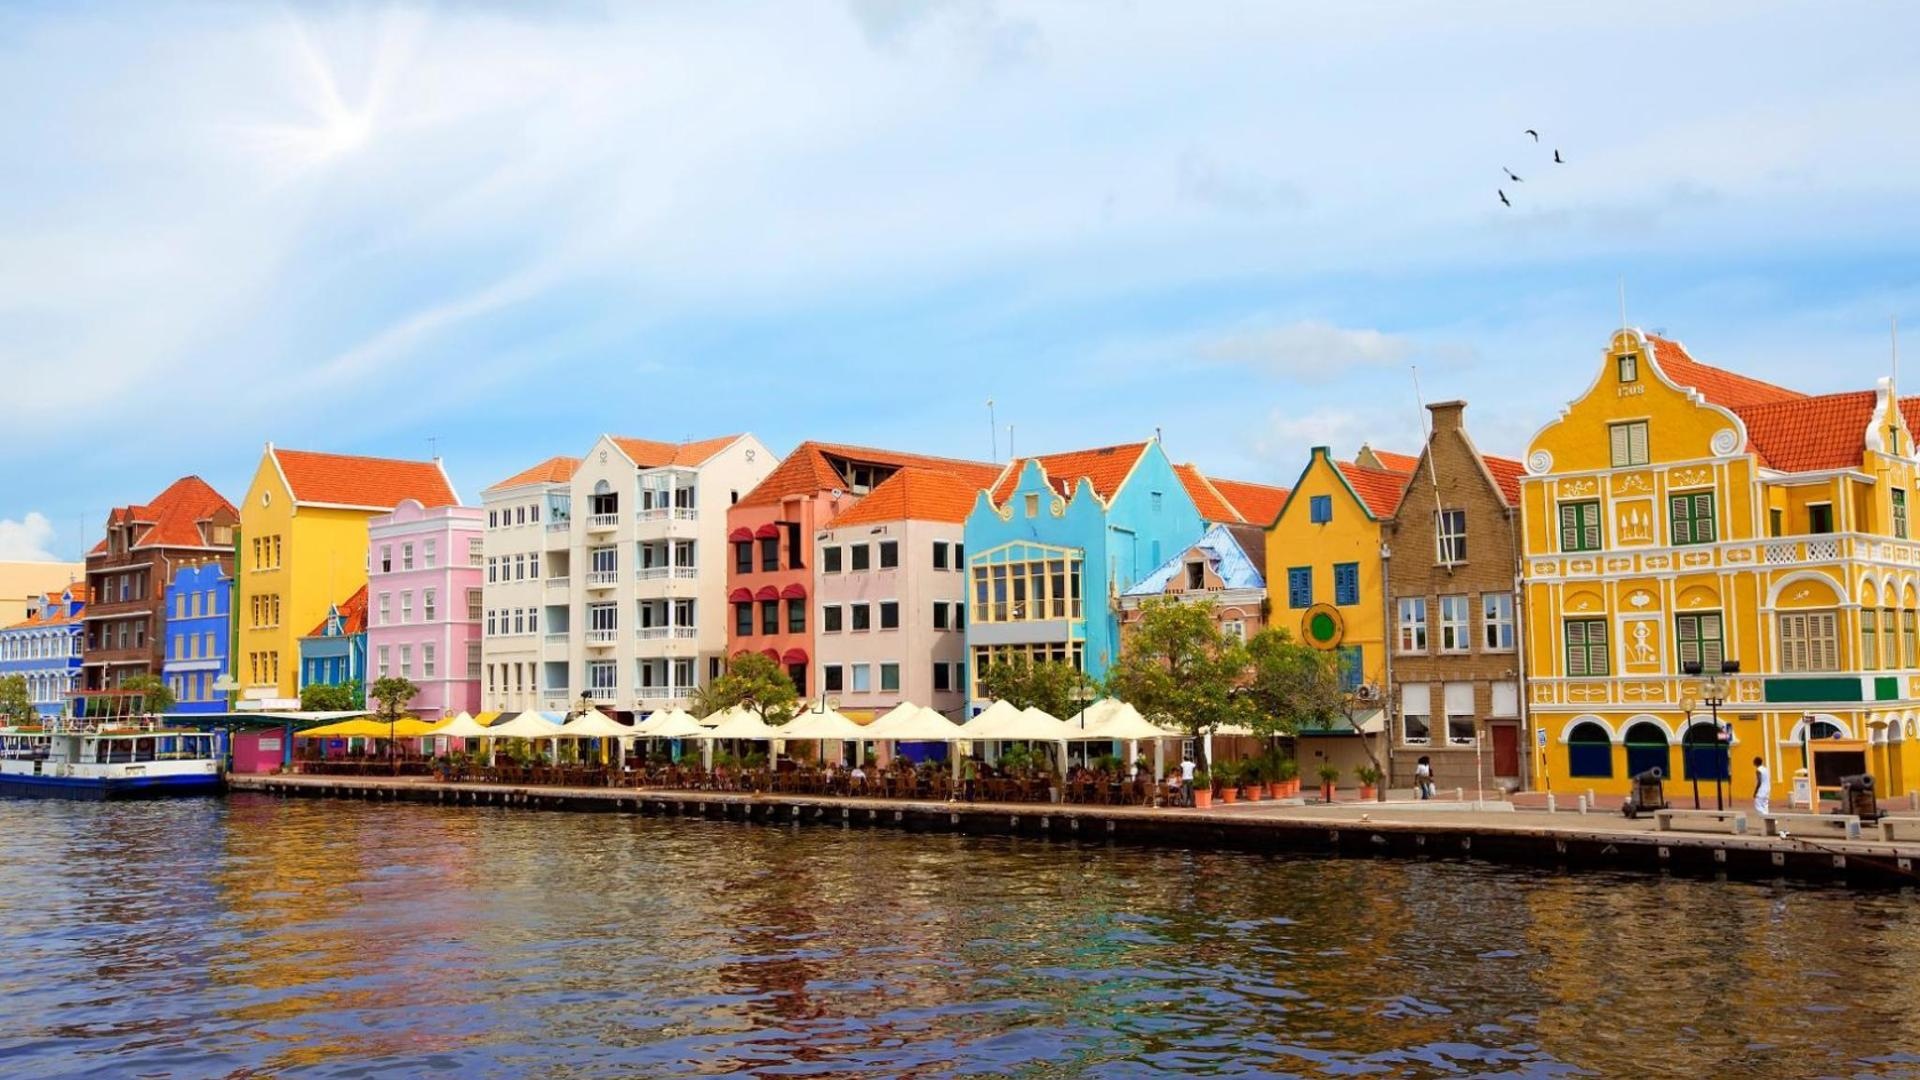 Curacao wallpaper, Stunning backgrounds, Captivating imagery, Visual delight, 1920x1080 Full HD Desktop